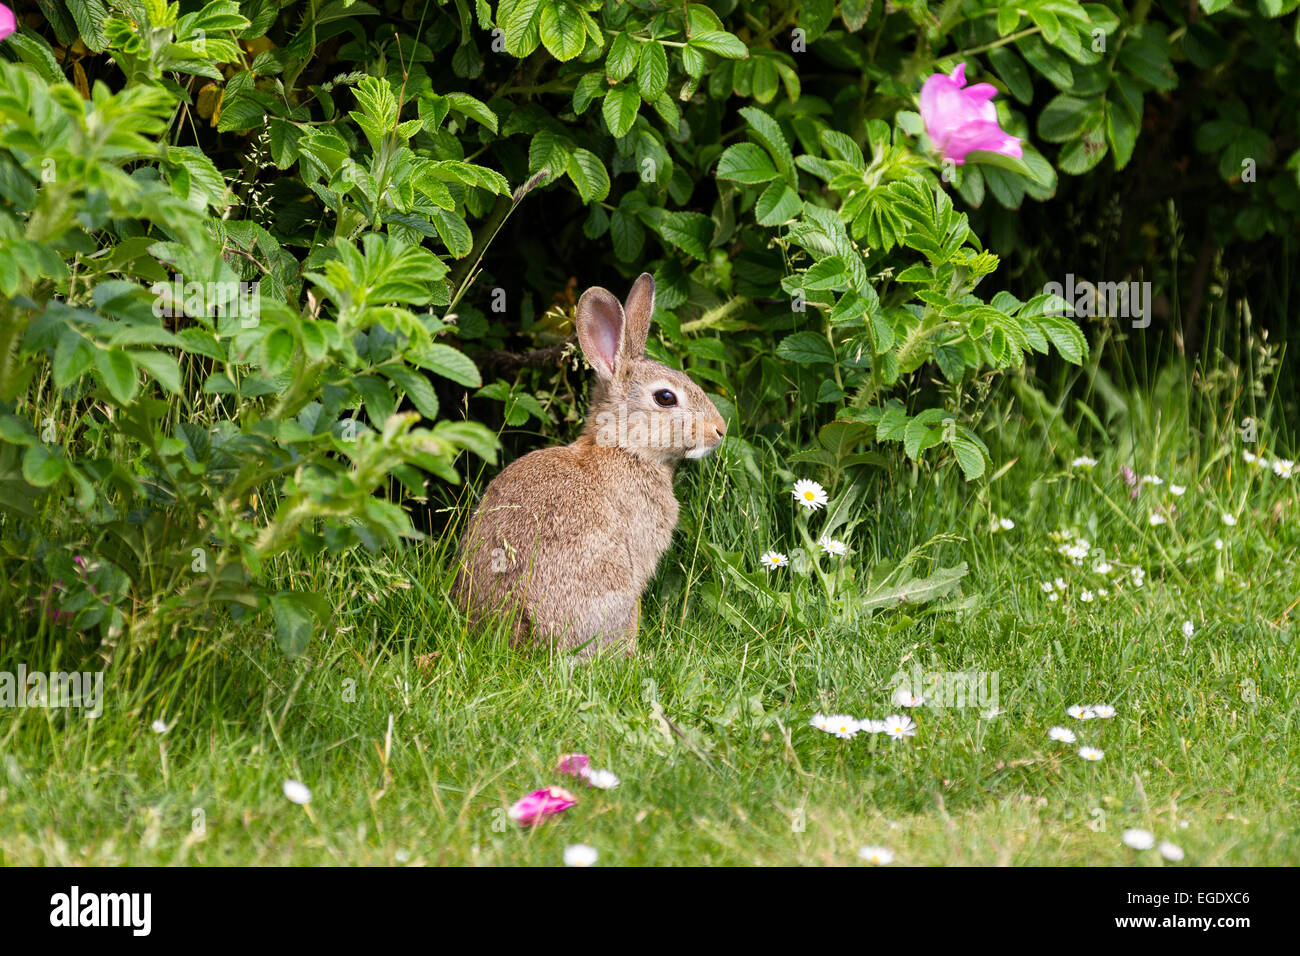 Rabbit in front of a ramanas rose, Oryctolagus cuniculus, Norderney Island, Lower Saxony, Germany Stock Photo